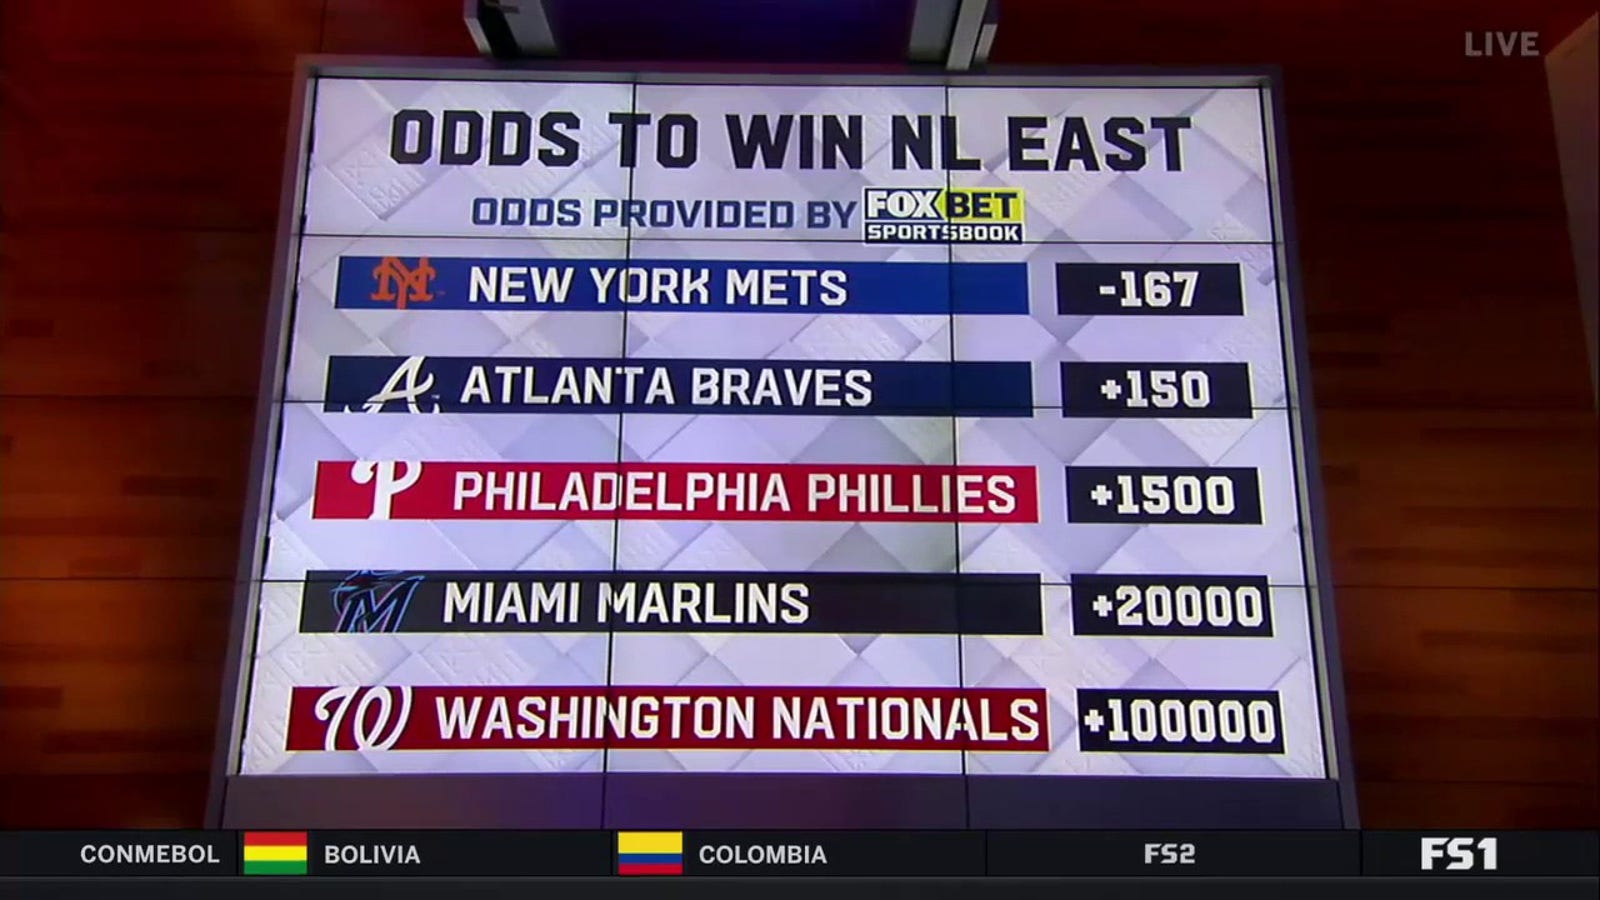 Mets or Braves: Who wins the NL East?